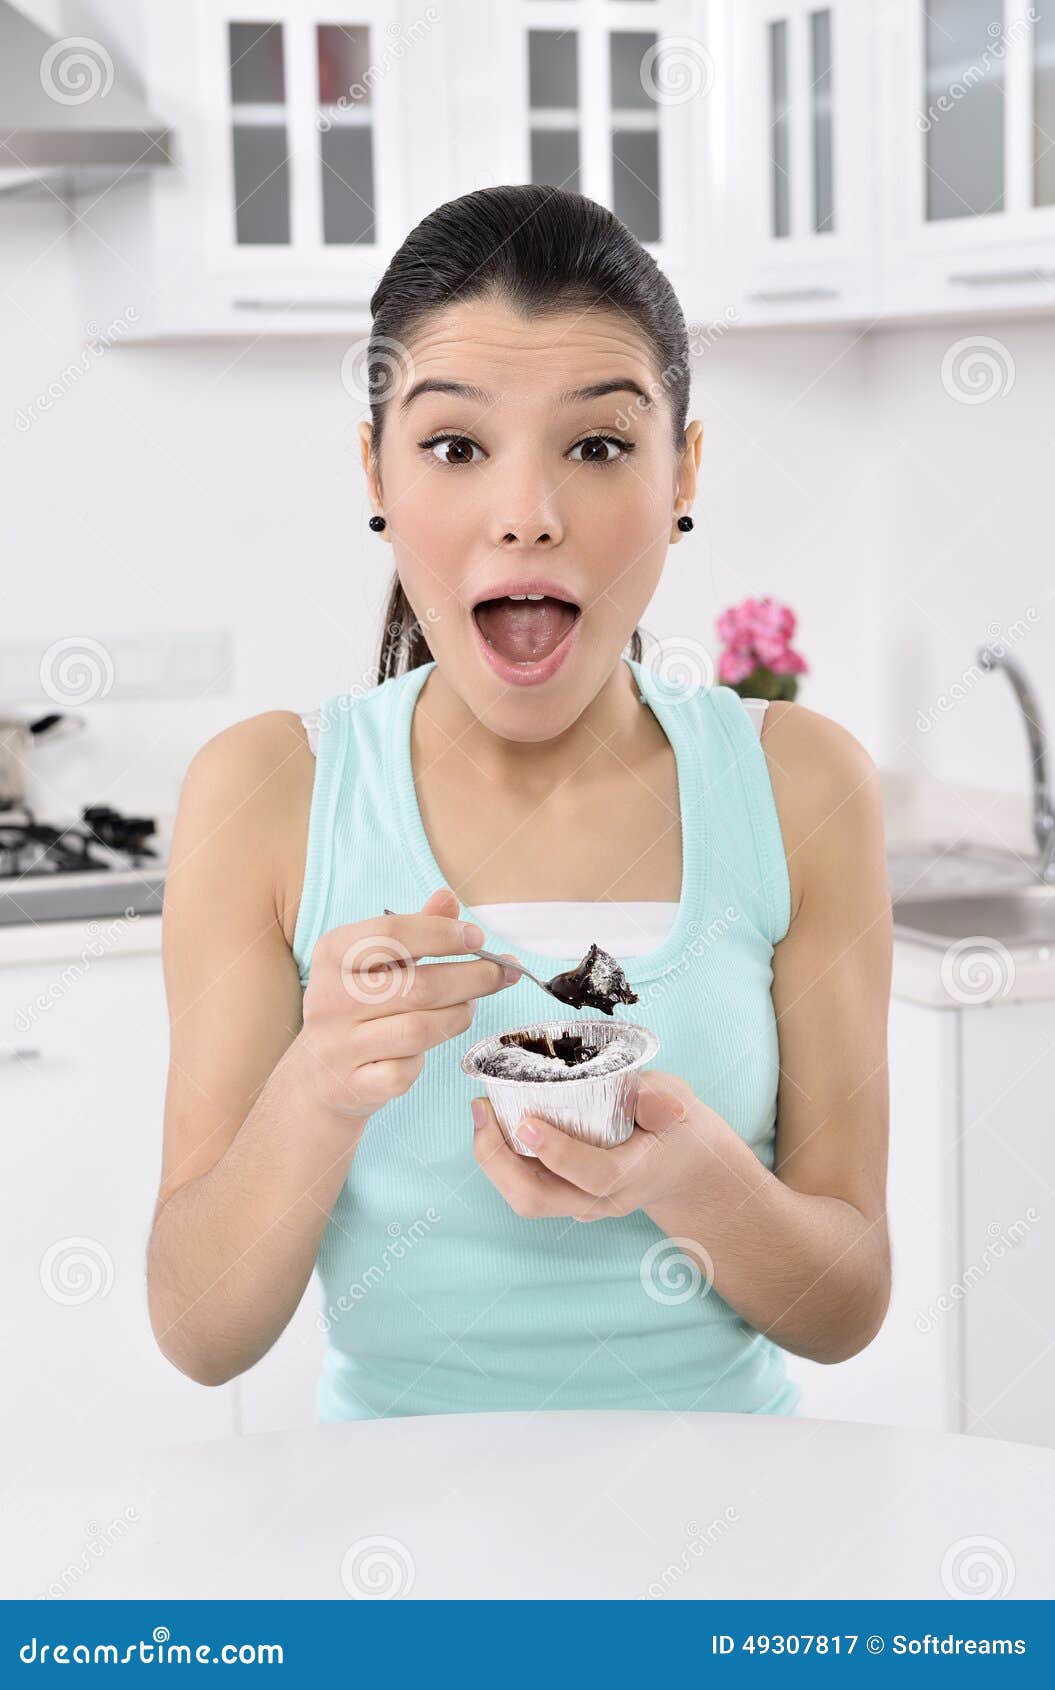 happy cute young woman eats a cake